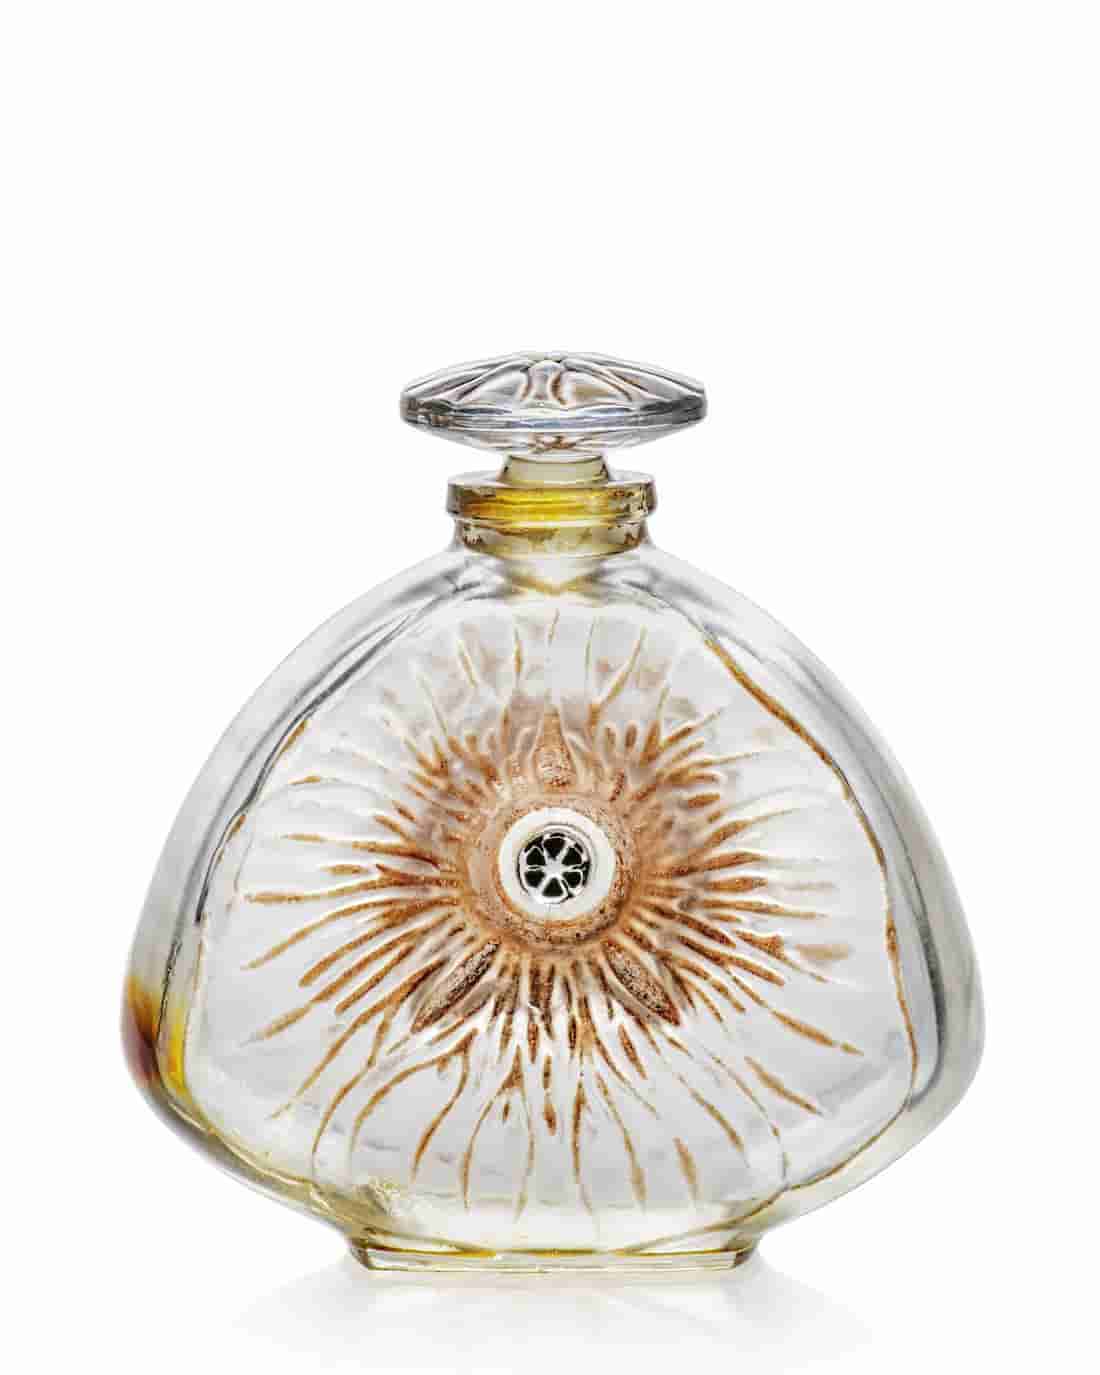 On the Scent of the Finest Lalique